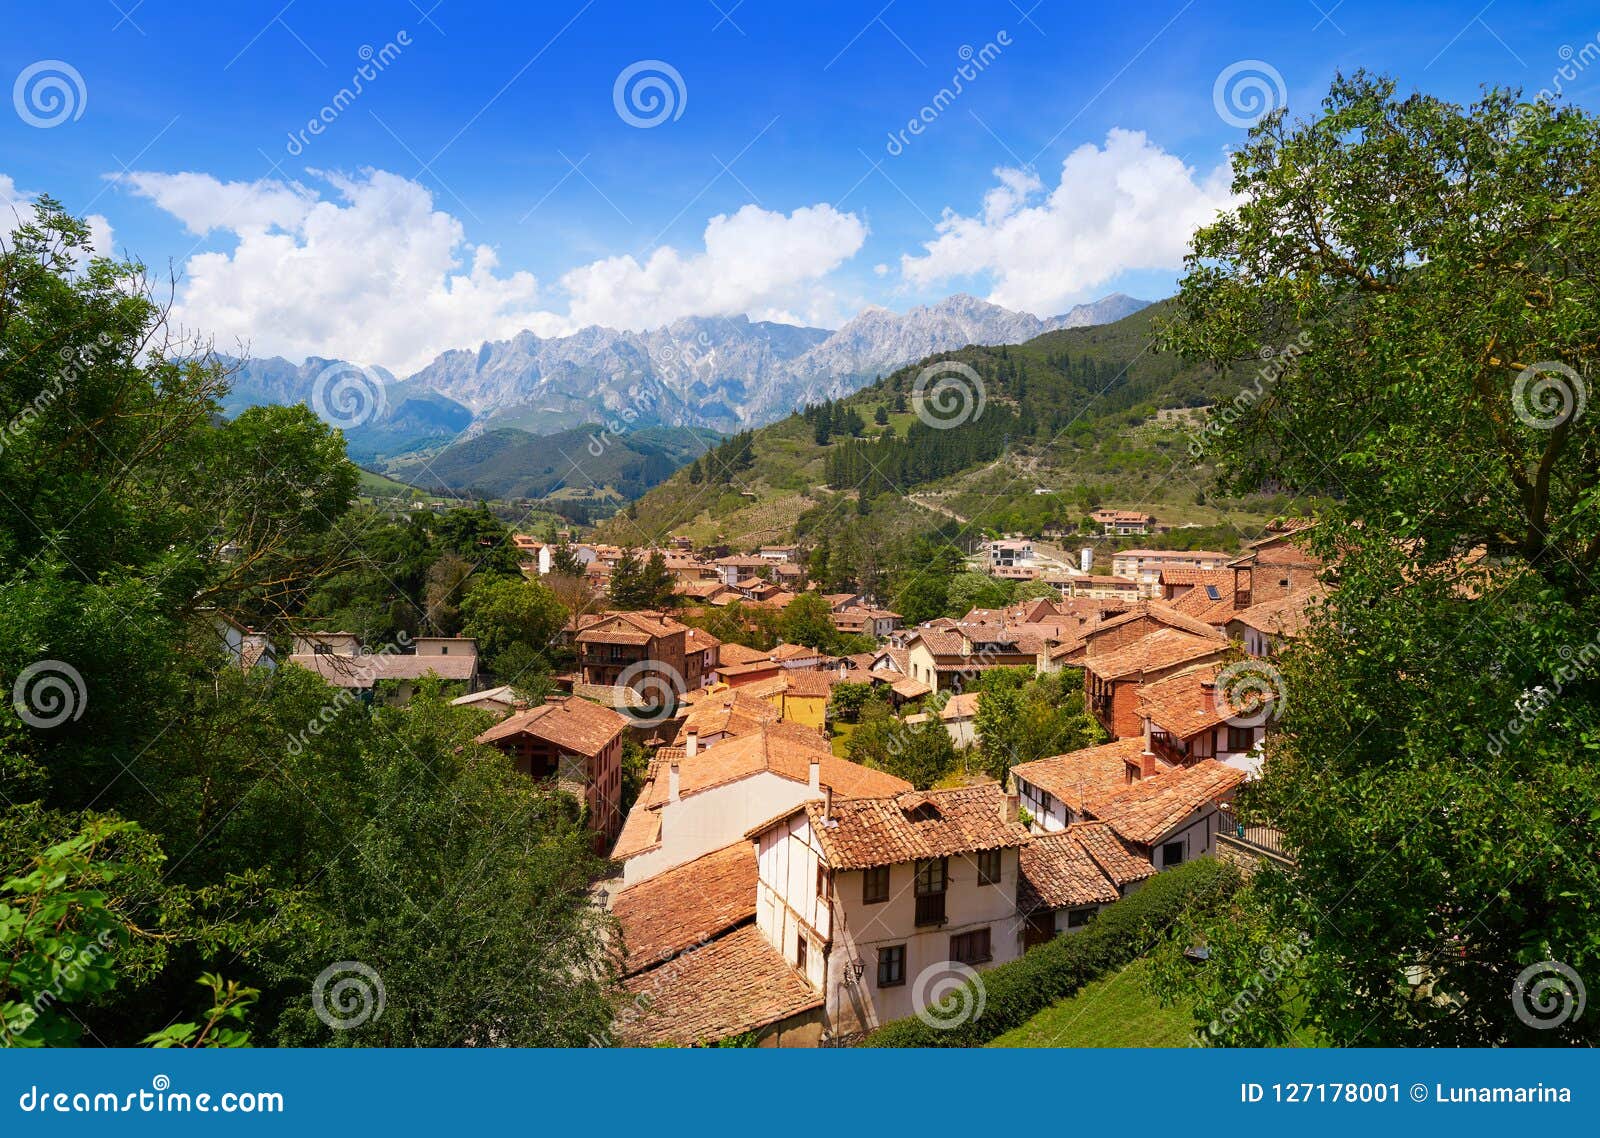 potes in cantabria skyline village spain